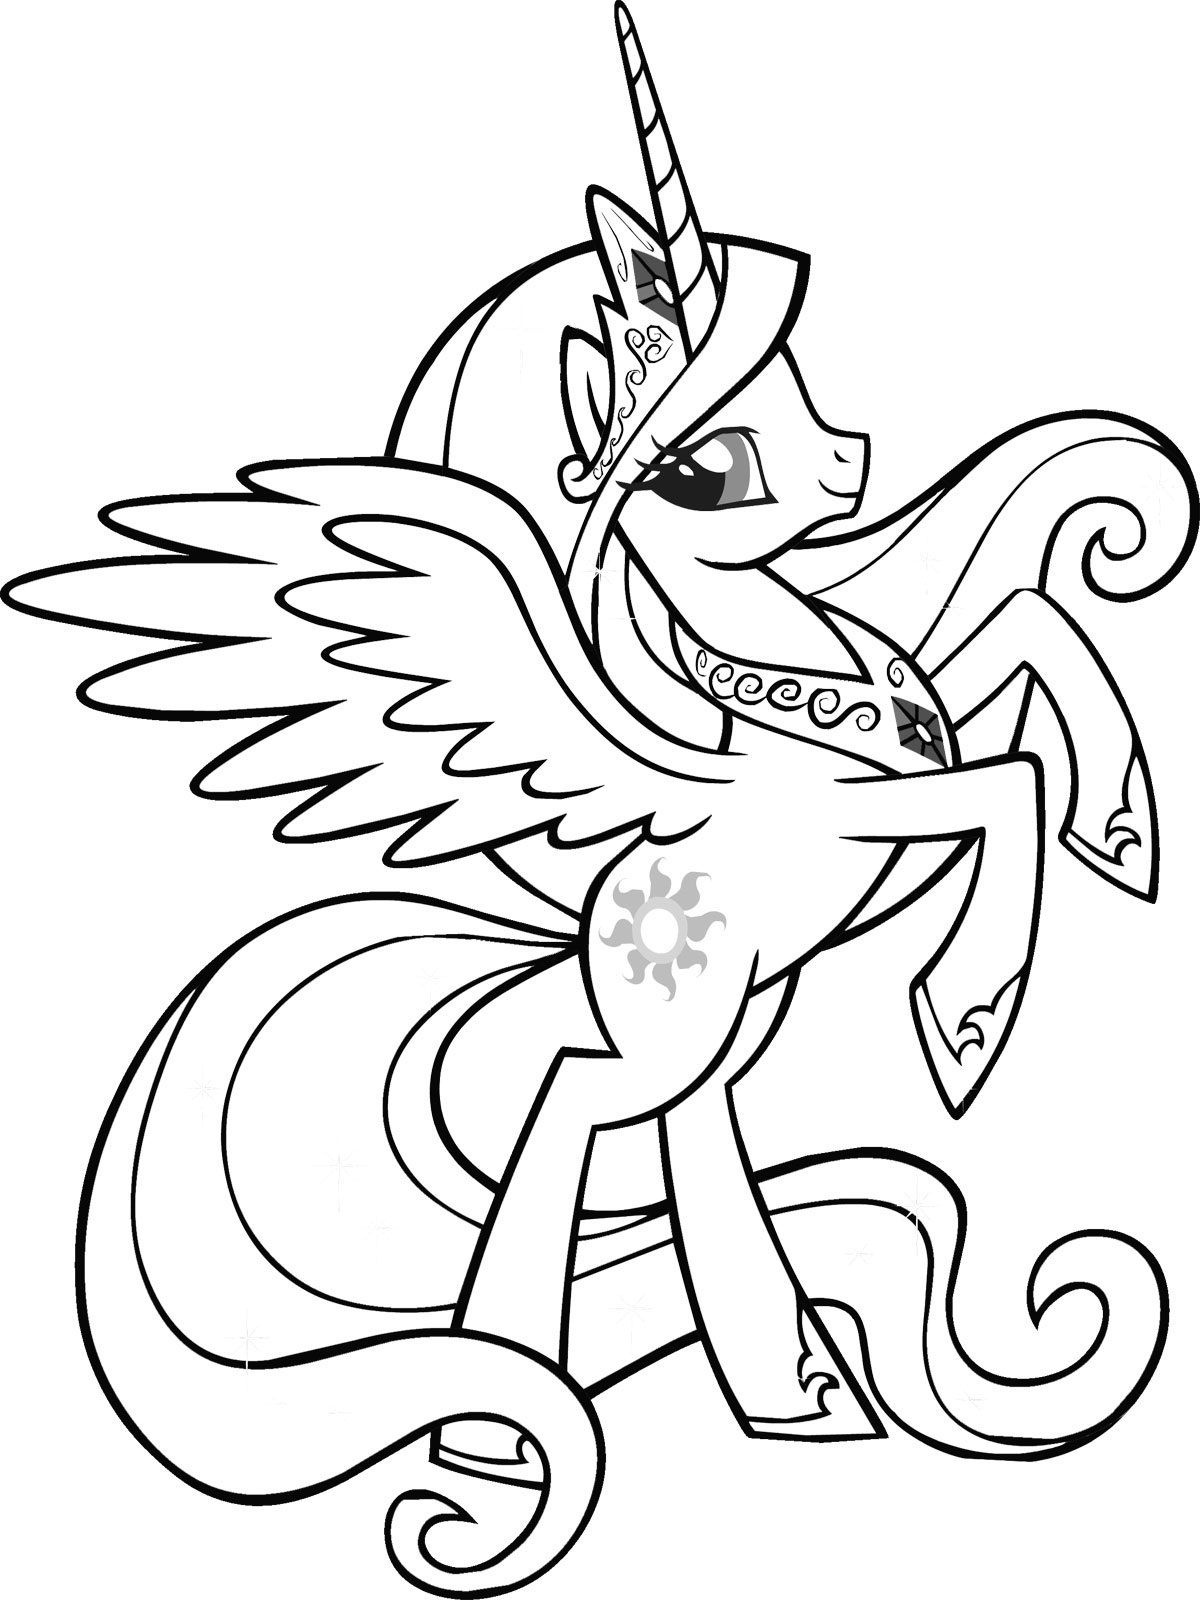 My Little Pony Coloring Pages To Print - Tutlin.psstech.co - Free Printable Coloring Pages Of My Little Pony